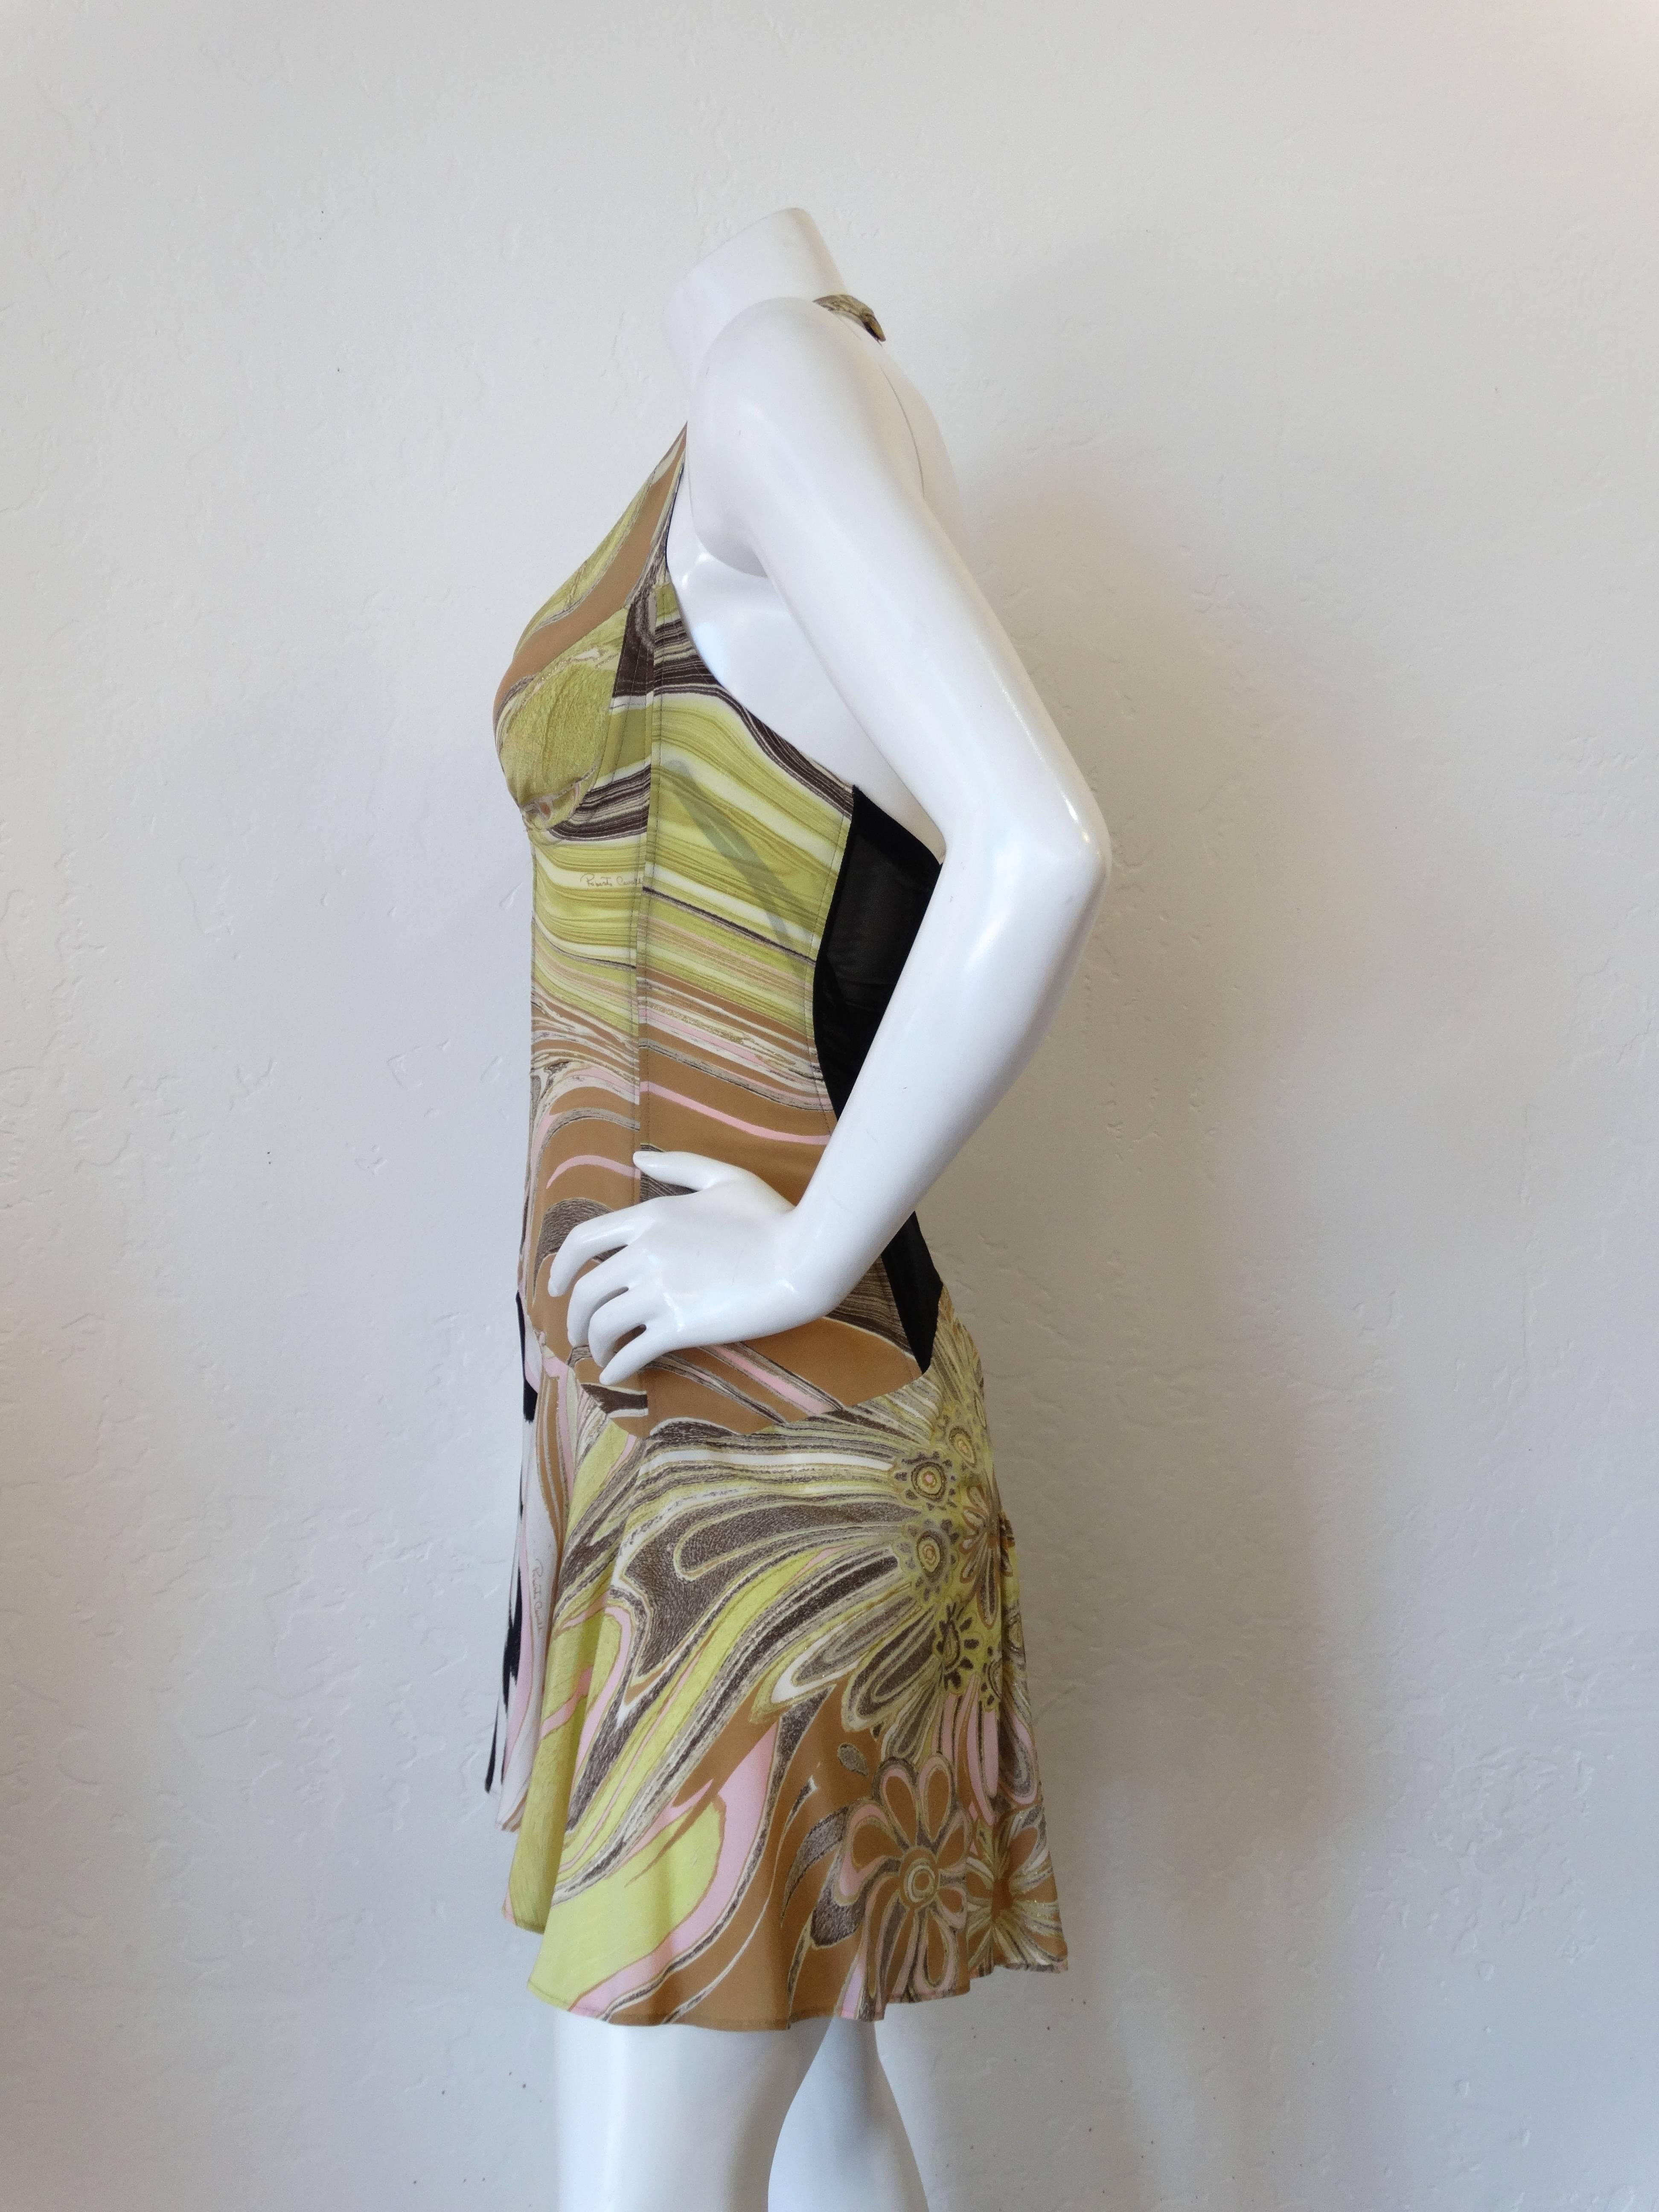 This NWT Roberto Cavalli dress is in brand new condition. This incredible dress boasts a sexy woven cut out below the bust with a boning reinforced bodice. Halter strap fastens at the back of the neck- hook and eye closures up the mesh panel in the